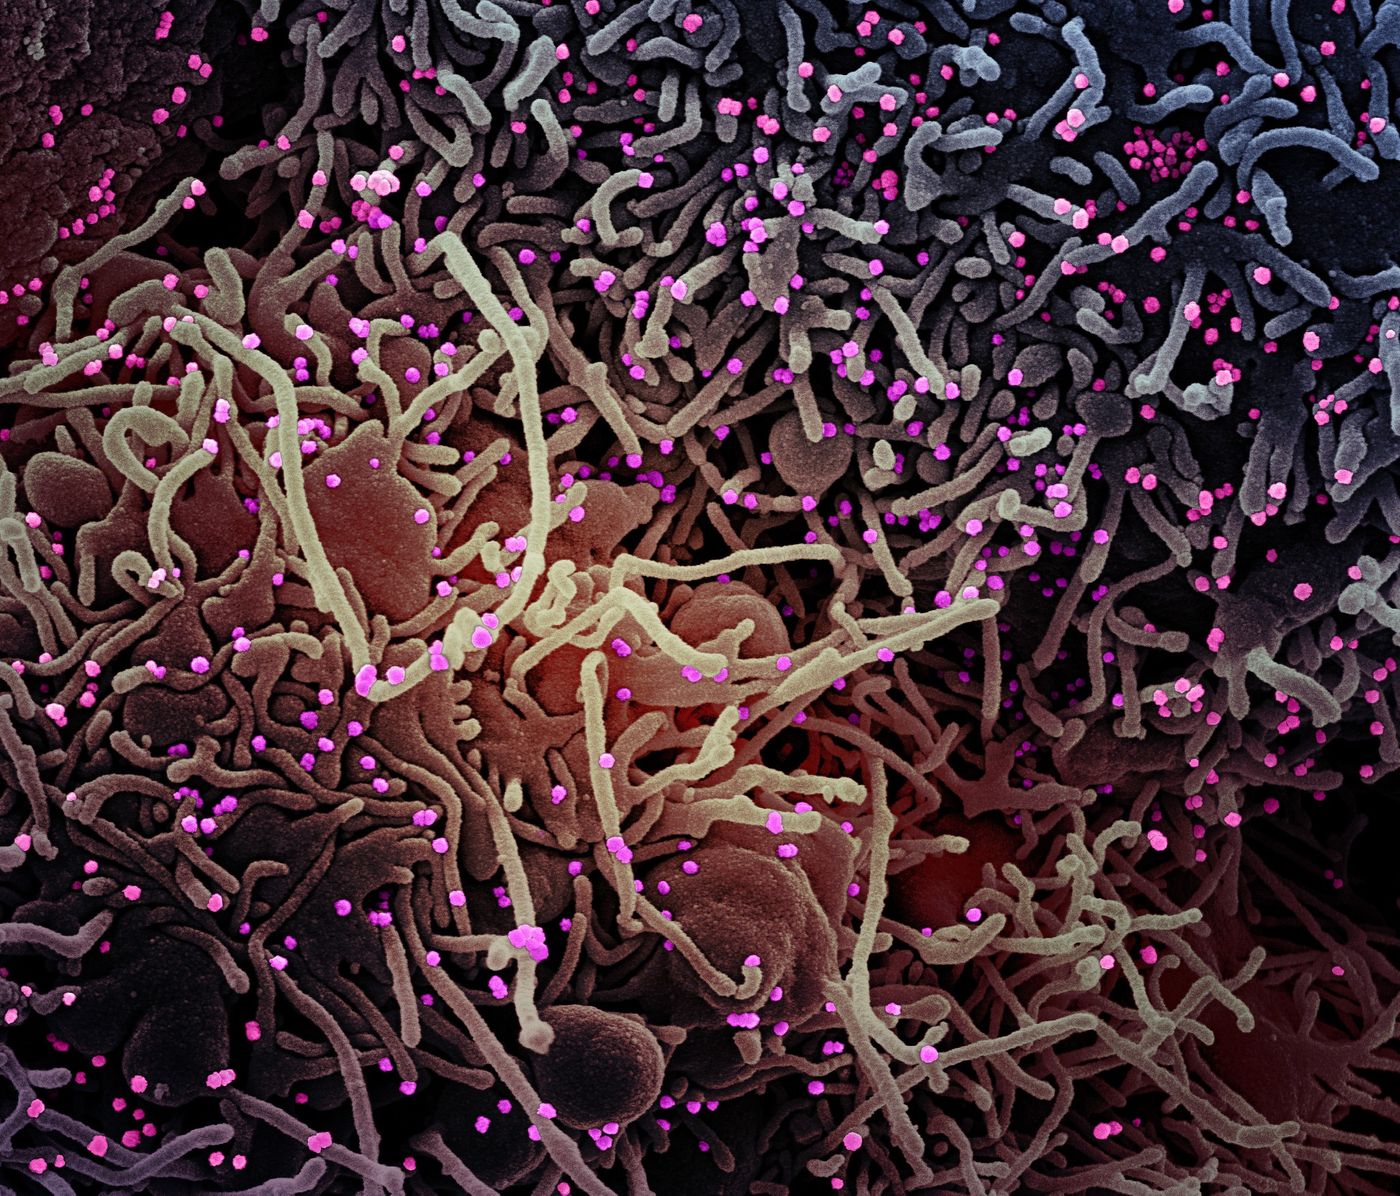 Colorized scanning electron micrograph of a VERO E6 cell (purple) exhibiting elongated cell projections and signs of apoptosis, after infection with SARS-COV-2 virus particles (pink), which were isolated from a patient sample. Image captured at the NIAID Integrated Research Facility (IRF) in Fort Detrick, Maryland. / Credit: NIAID